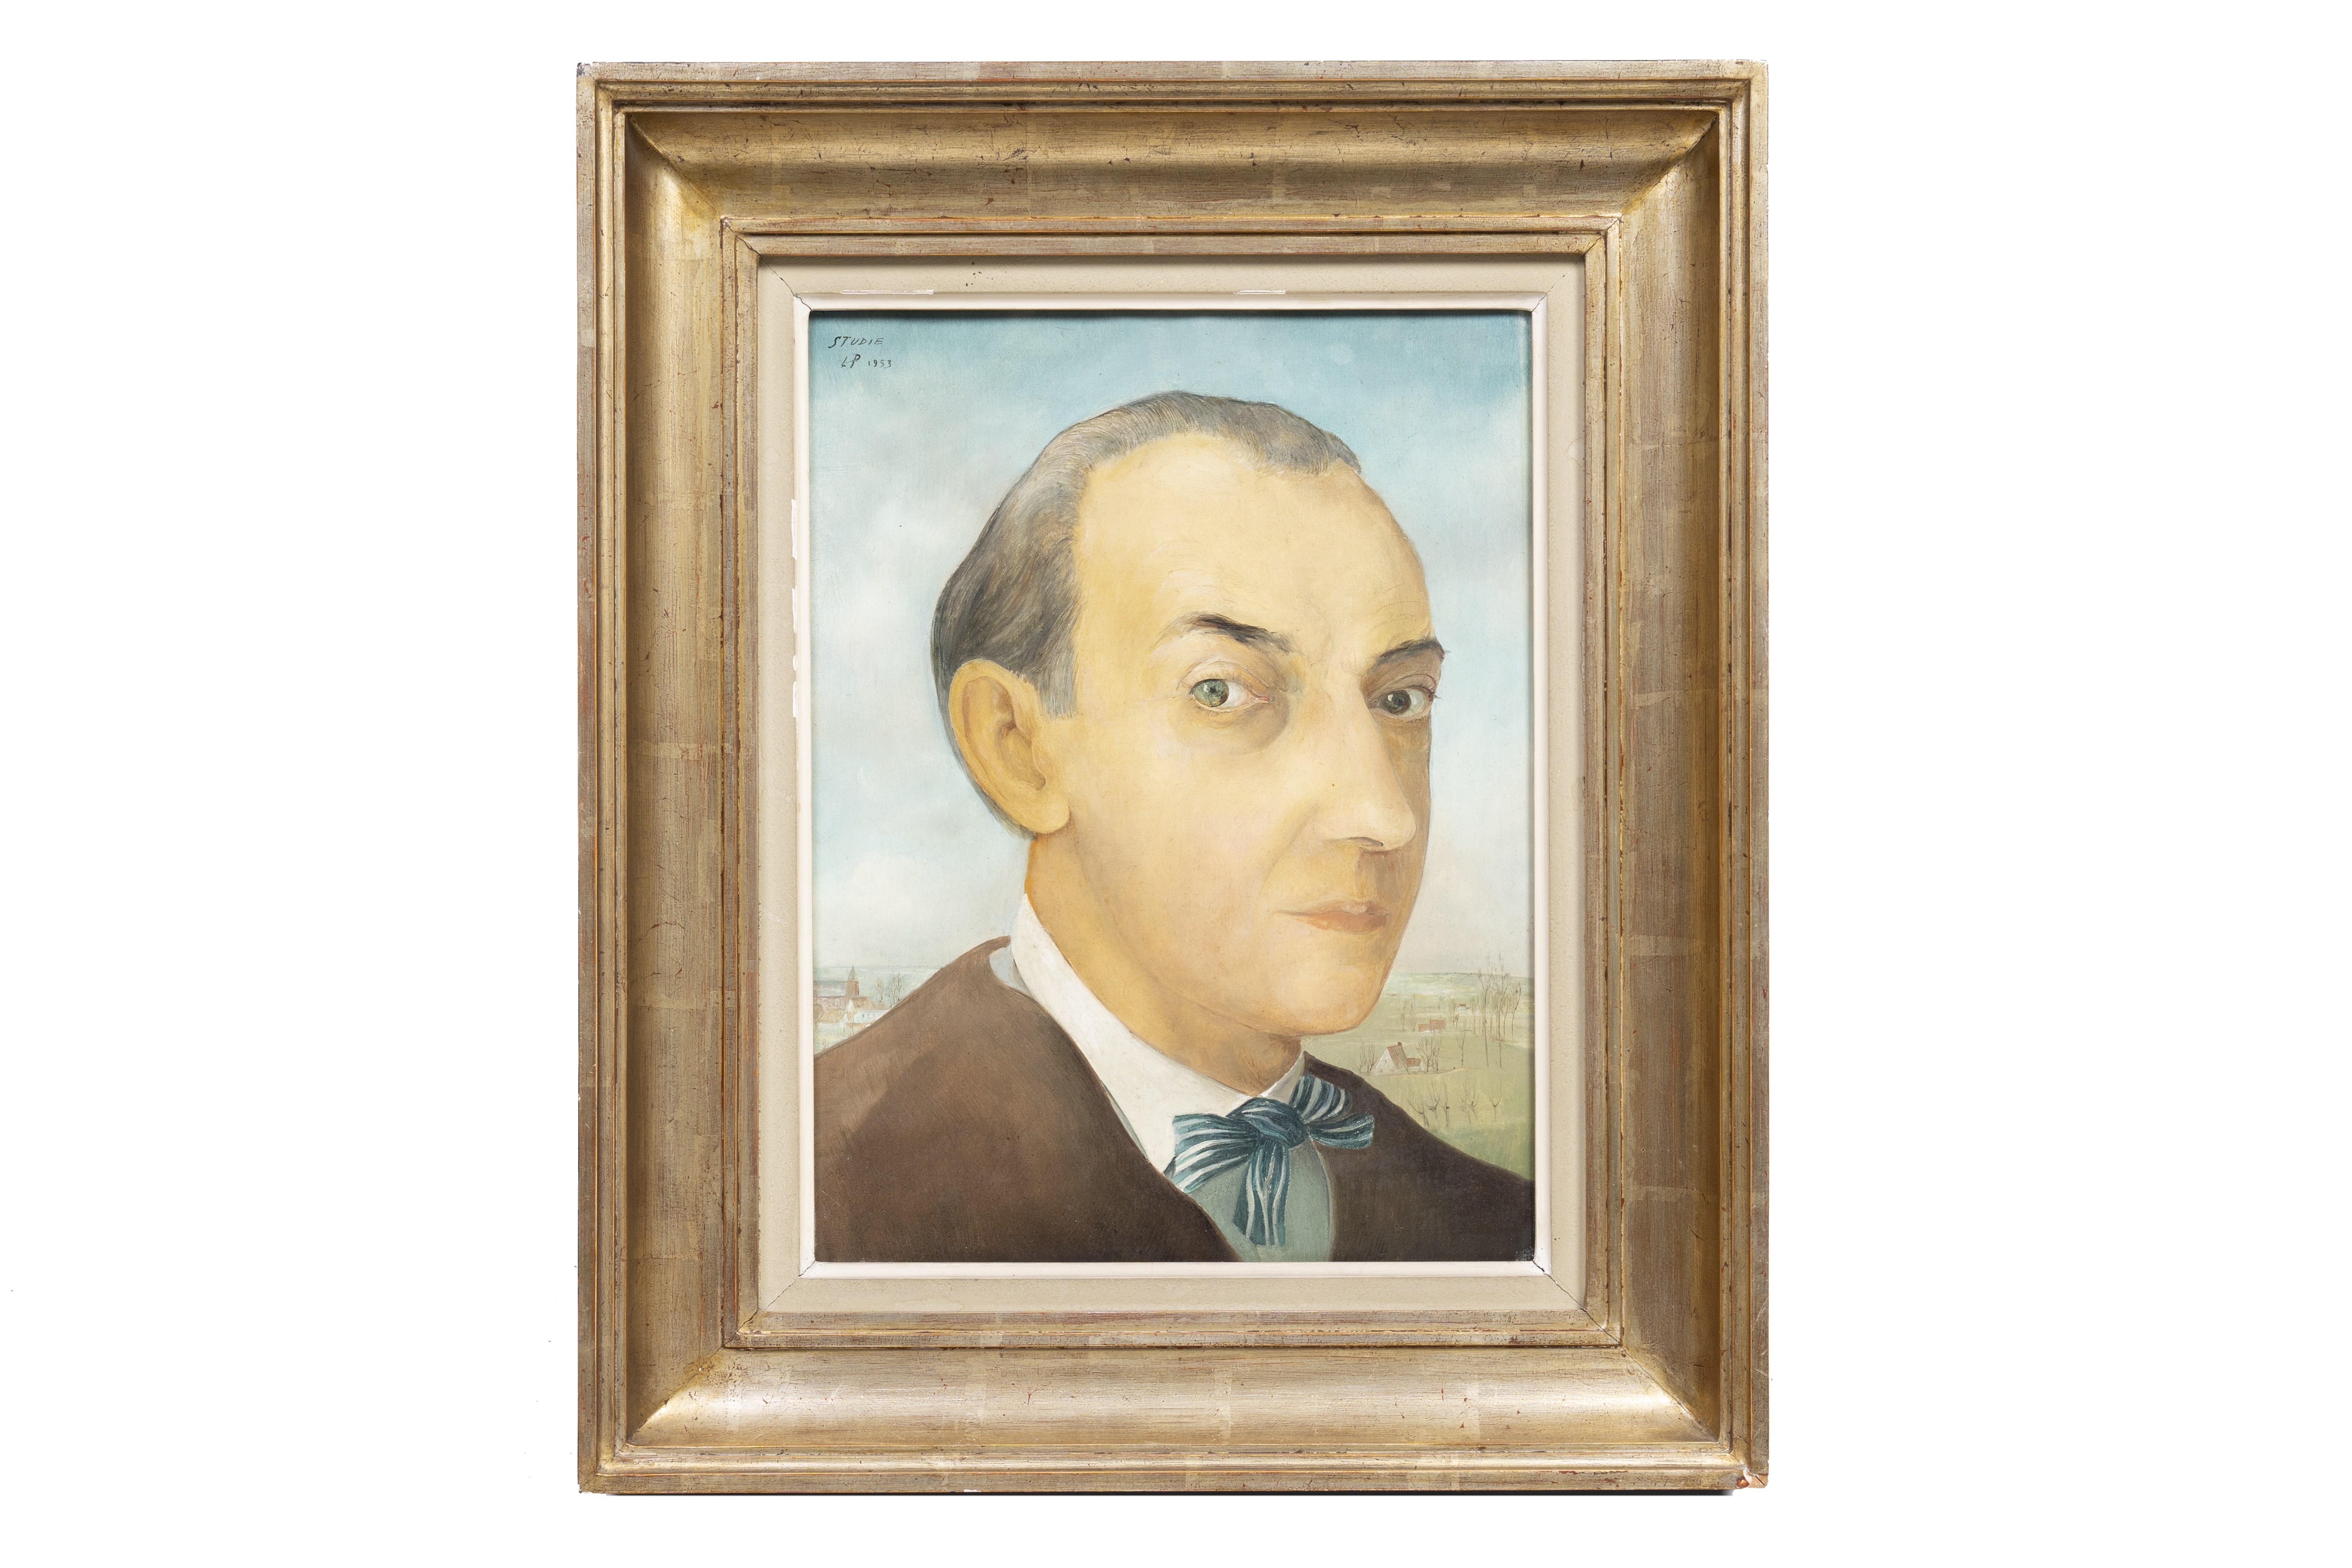 Leo Piron (1899-1962): 'Studie' (Self-portrait of the artist), oil on canvas, dated 1953 - Image 2 of 4